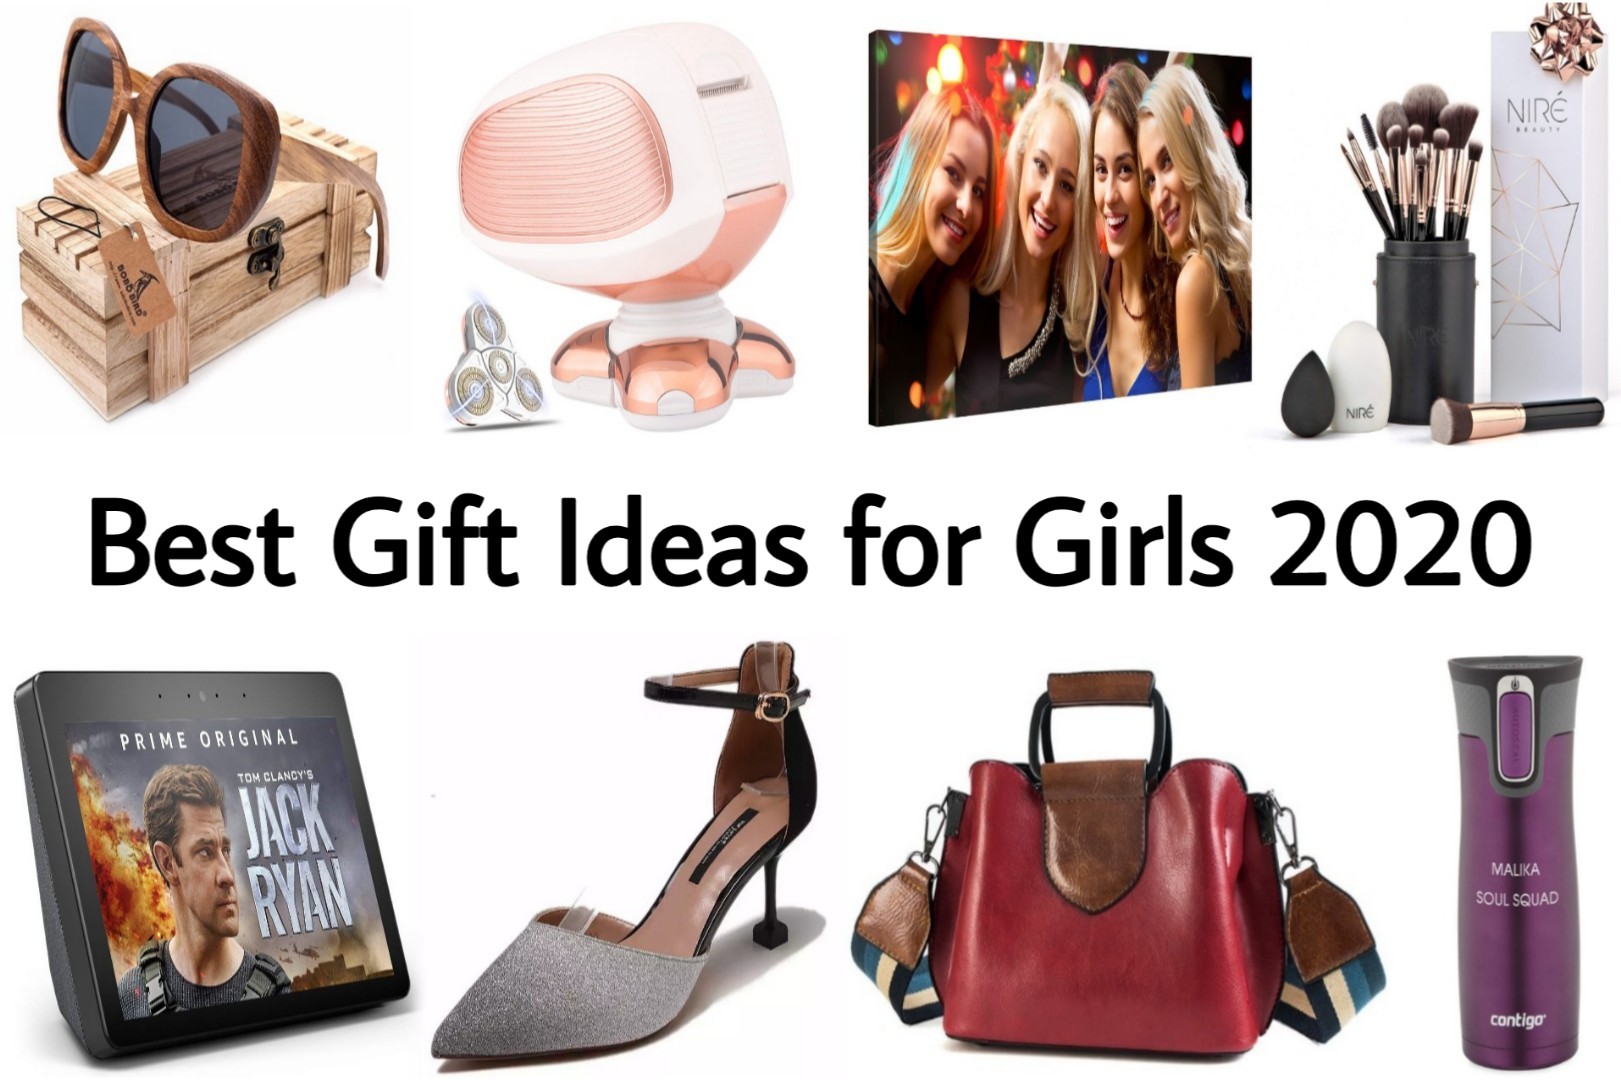 25 Christmas Gifts Ideas 2021 For Her Under $25